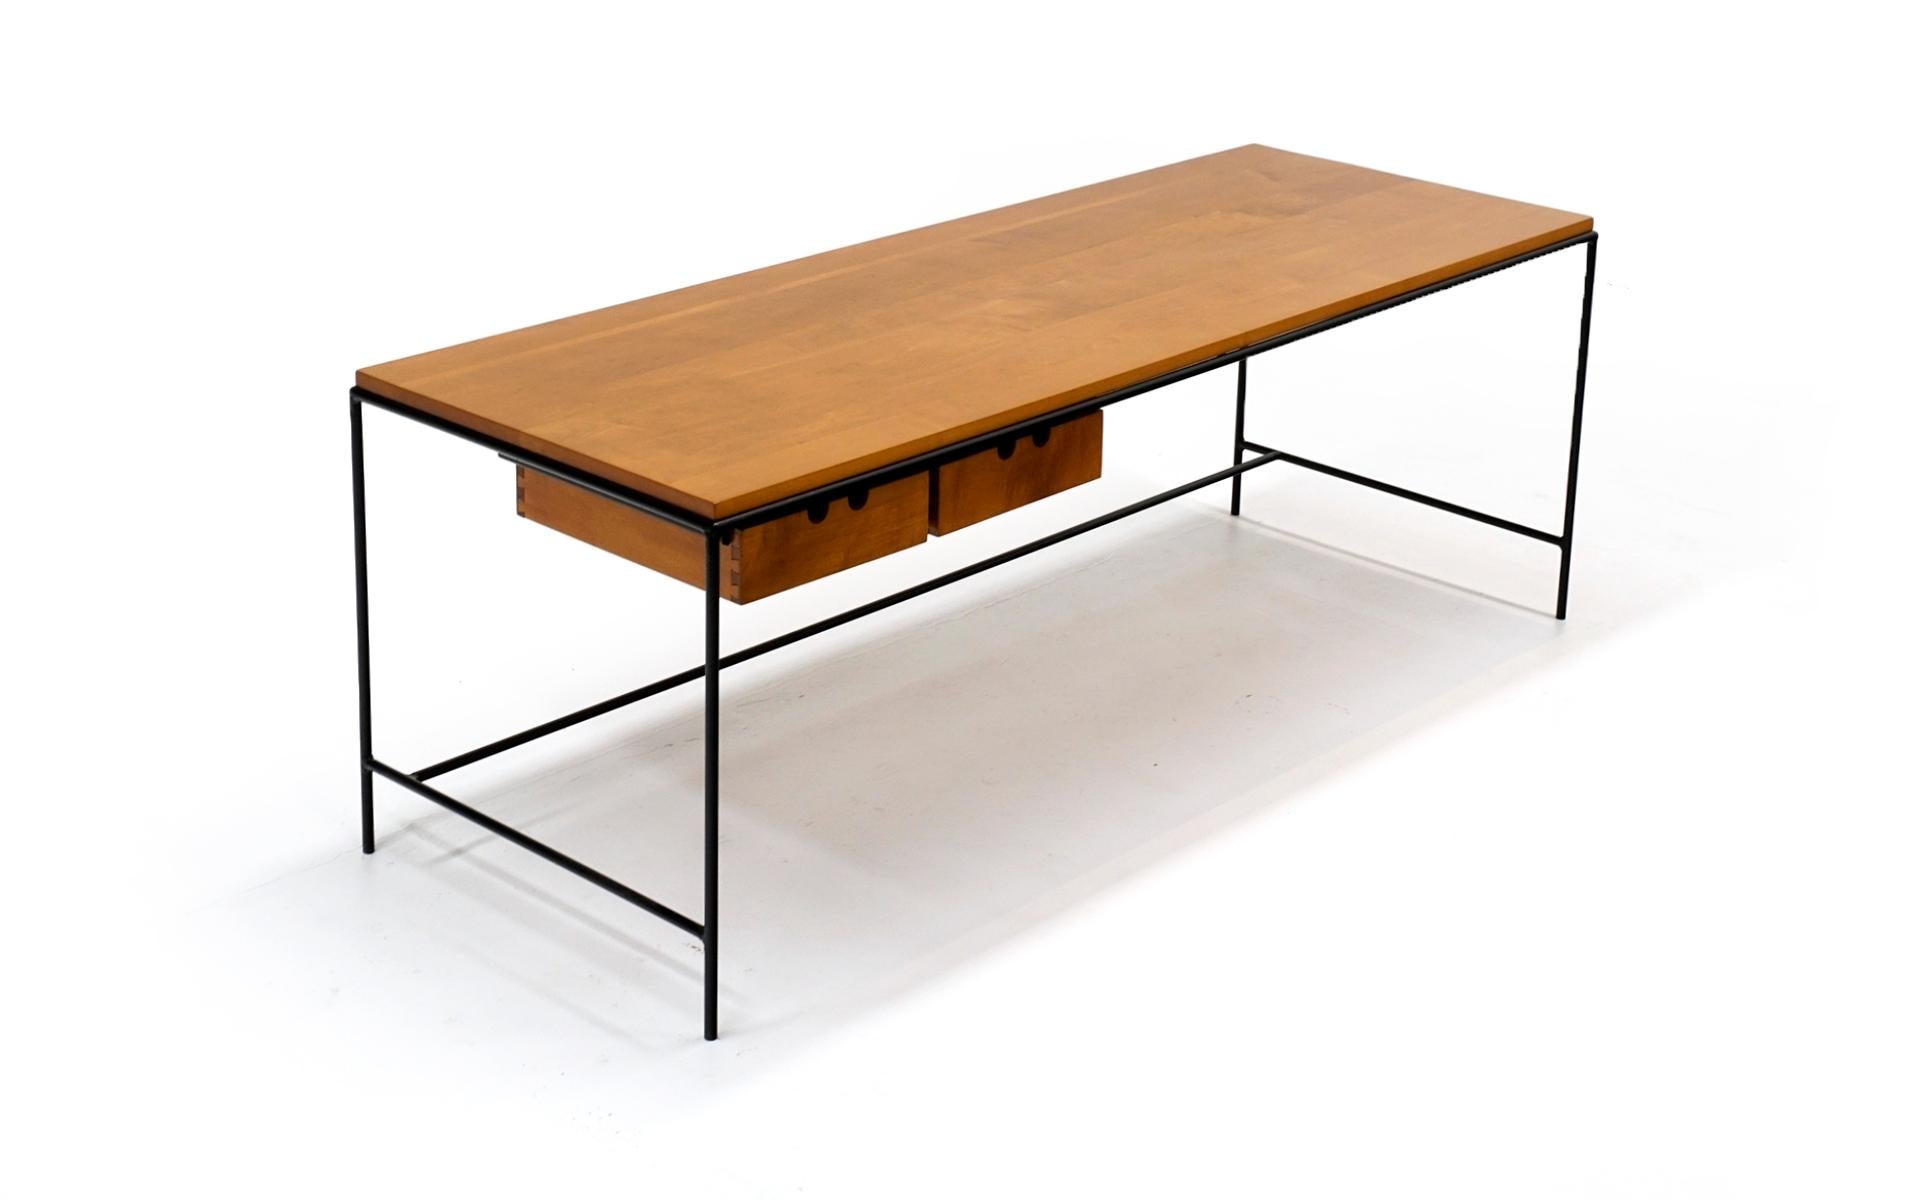 Early Planner Group coffee table designed by Paul McCobb for Winchendon Furniture Company, 1950s. Solid wrought iron frame with solid maple wood top and two drawers. Fairly large and tall rectangle at 60 inches wide, 16 inches deep and 22 inches